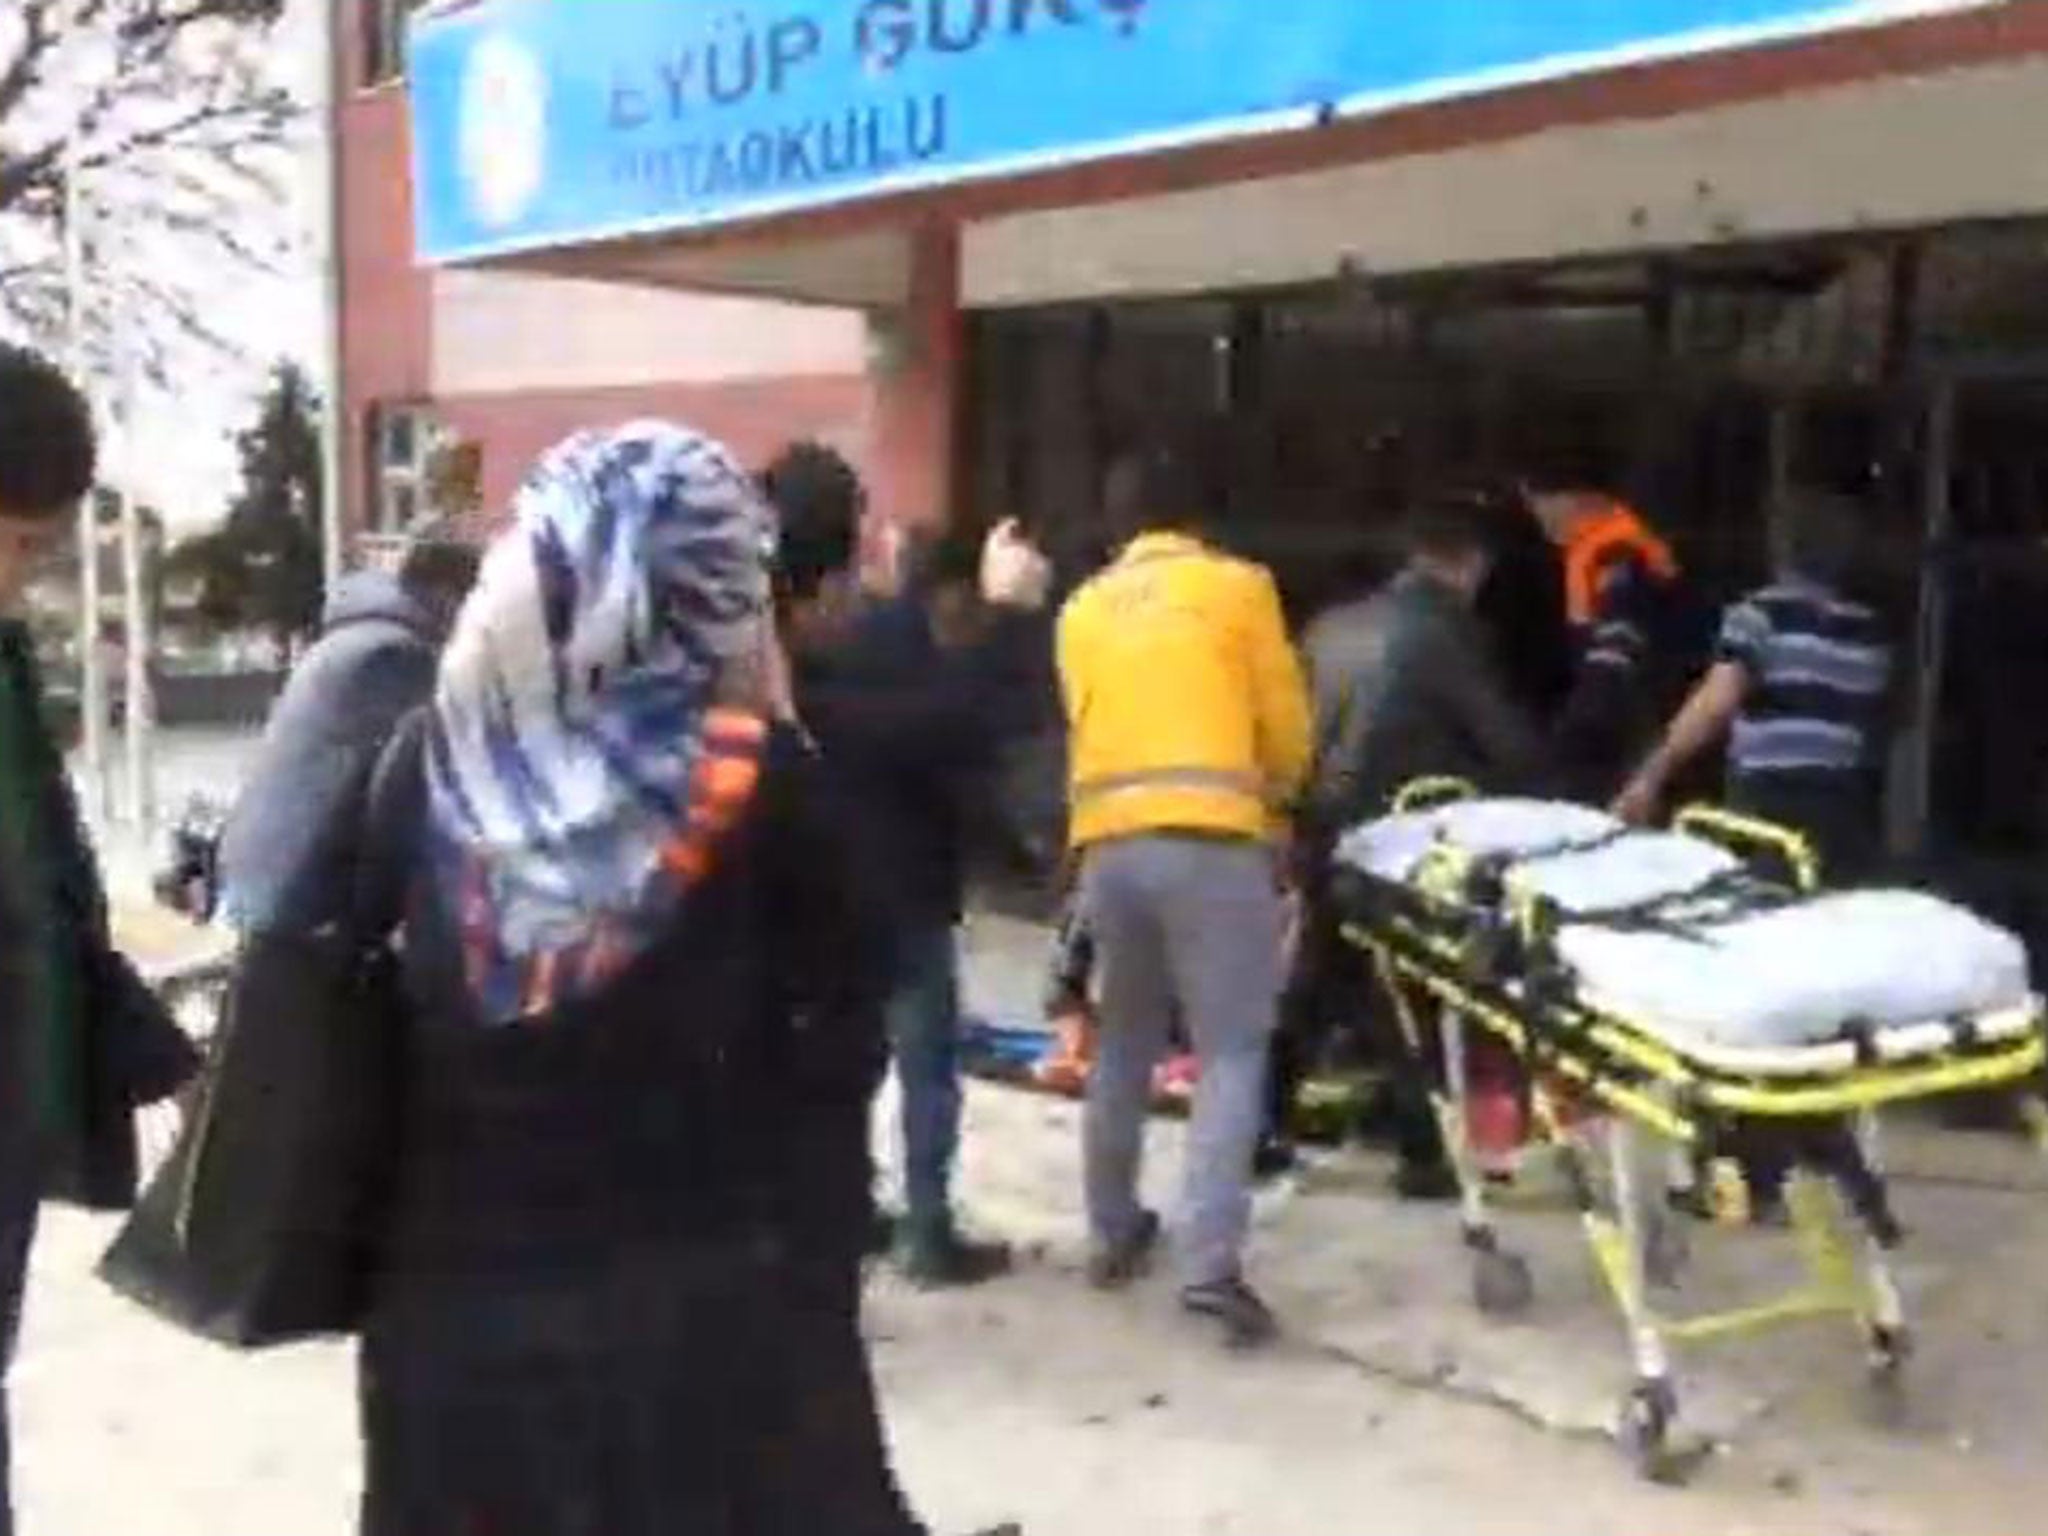 A teacher and children were believed to be among the victims at Eyüp Gökçeimam school in the city of Kilis